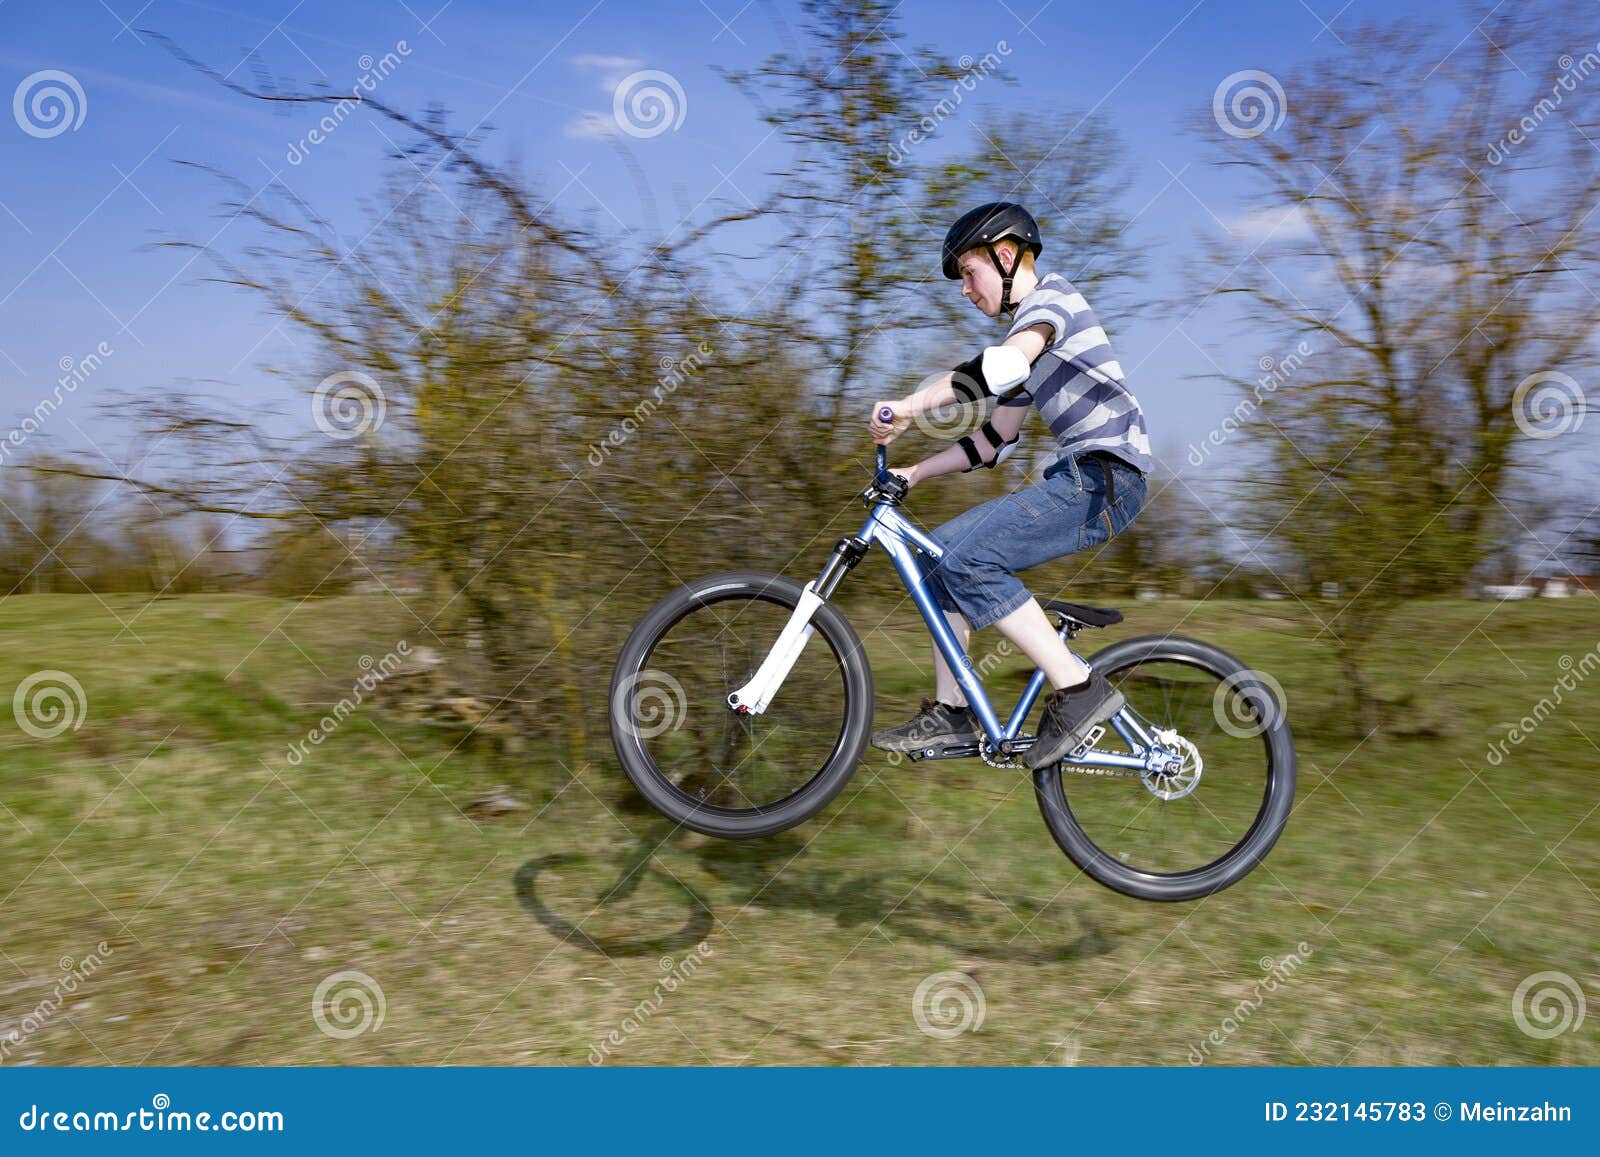 Boy Jumping with His Dirt Bike Stock Image - Image of high, outdoor ...